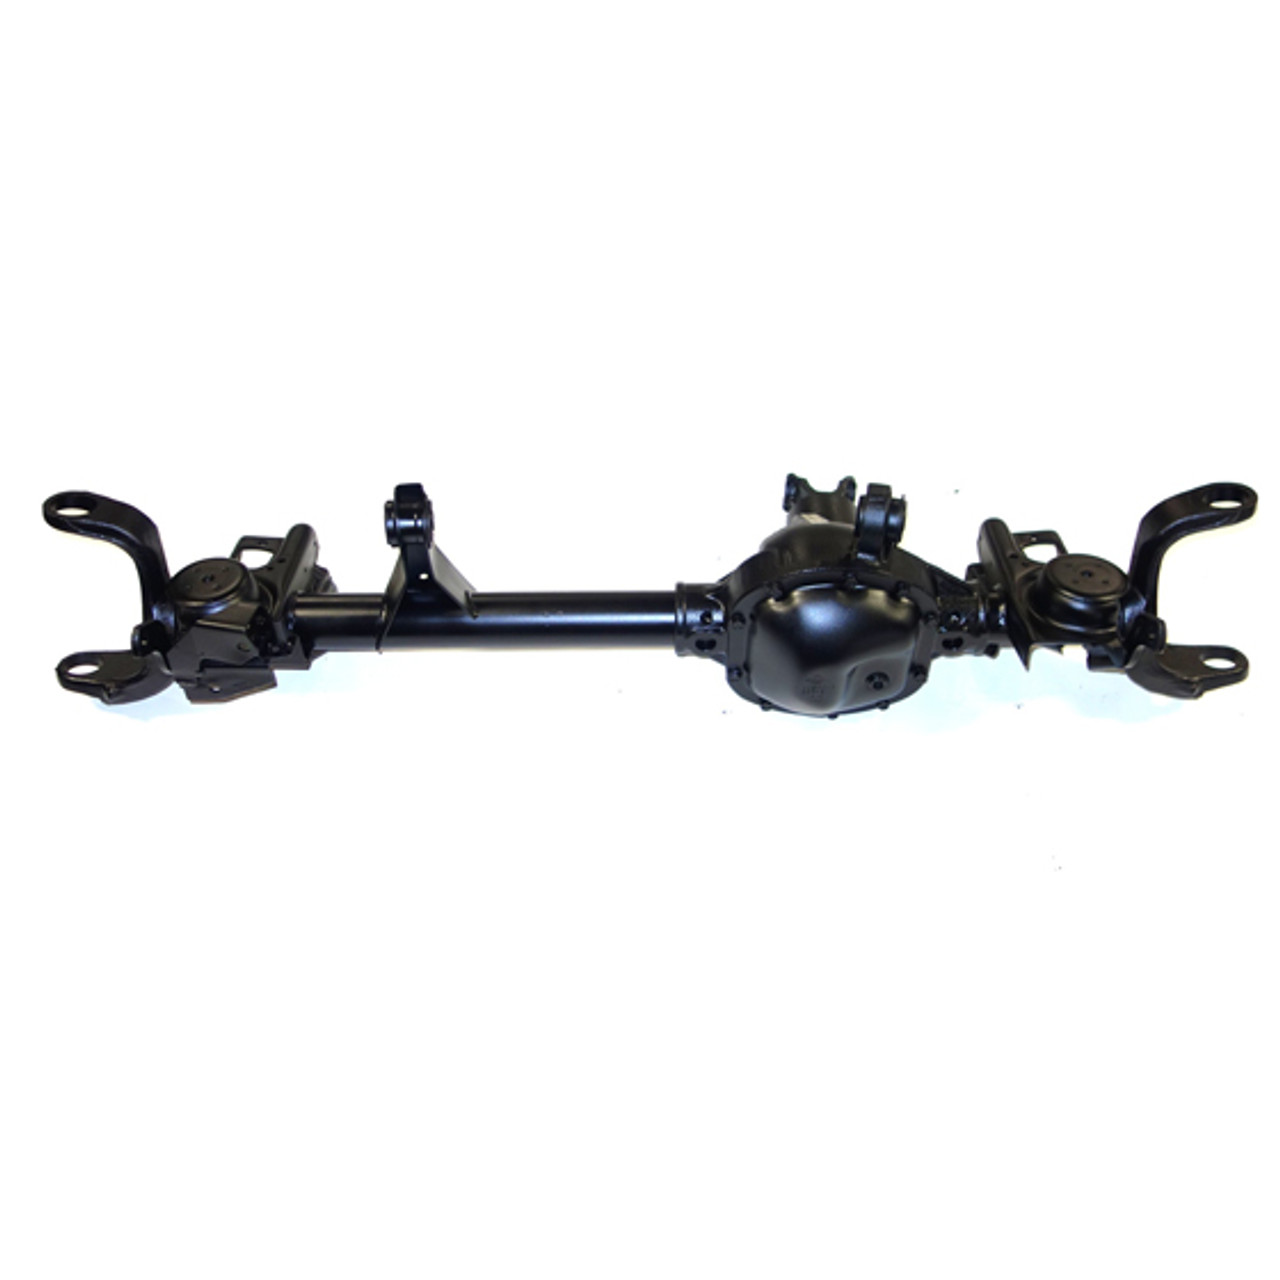 Reman Complete Axle Assembly for Dana 30 94-99 Jeep Cherokee 3.55 Ratio with ABS